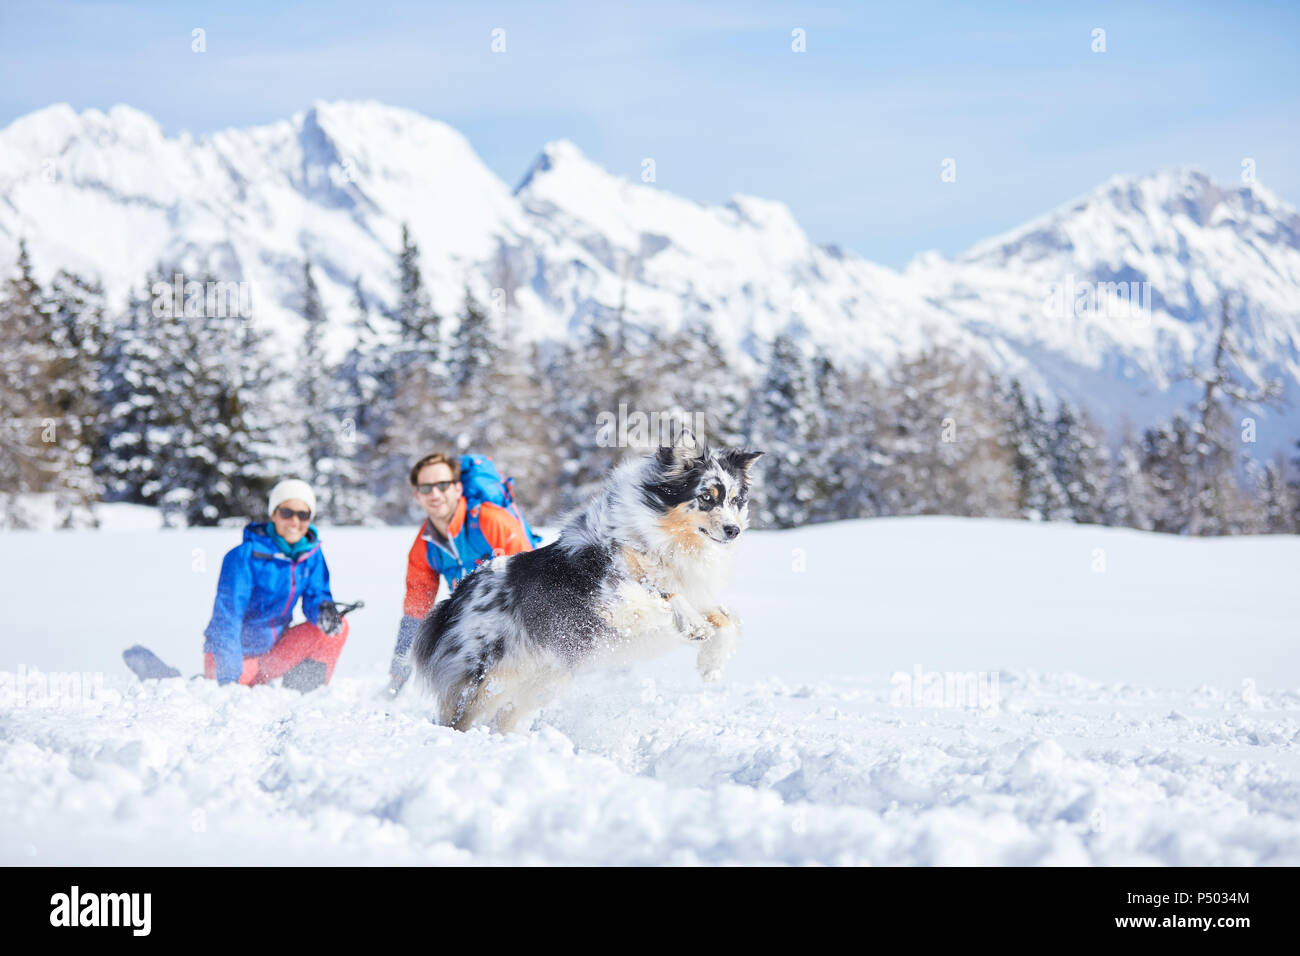 Austria, Tyrol, snowshoe hikers and dog, jumping in the snow Stock Photo